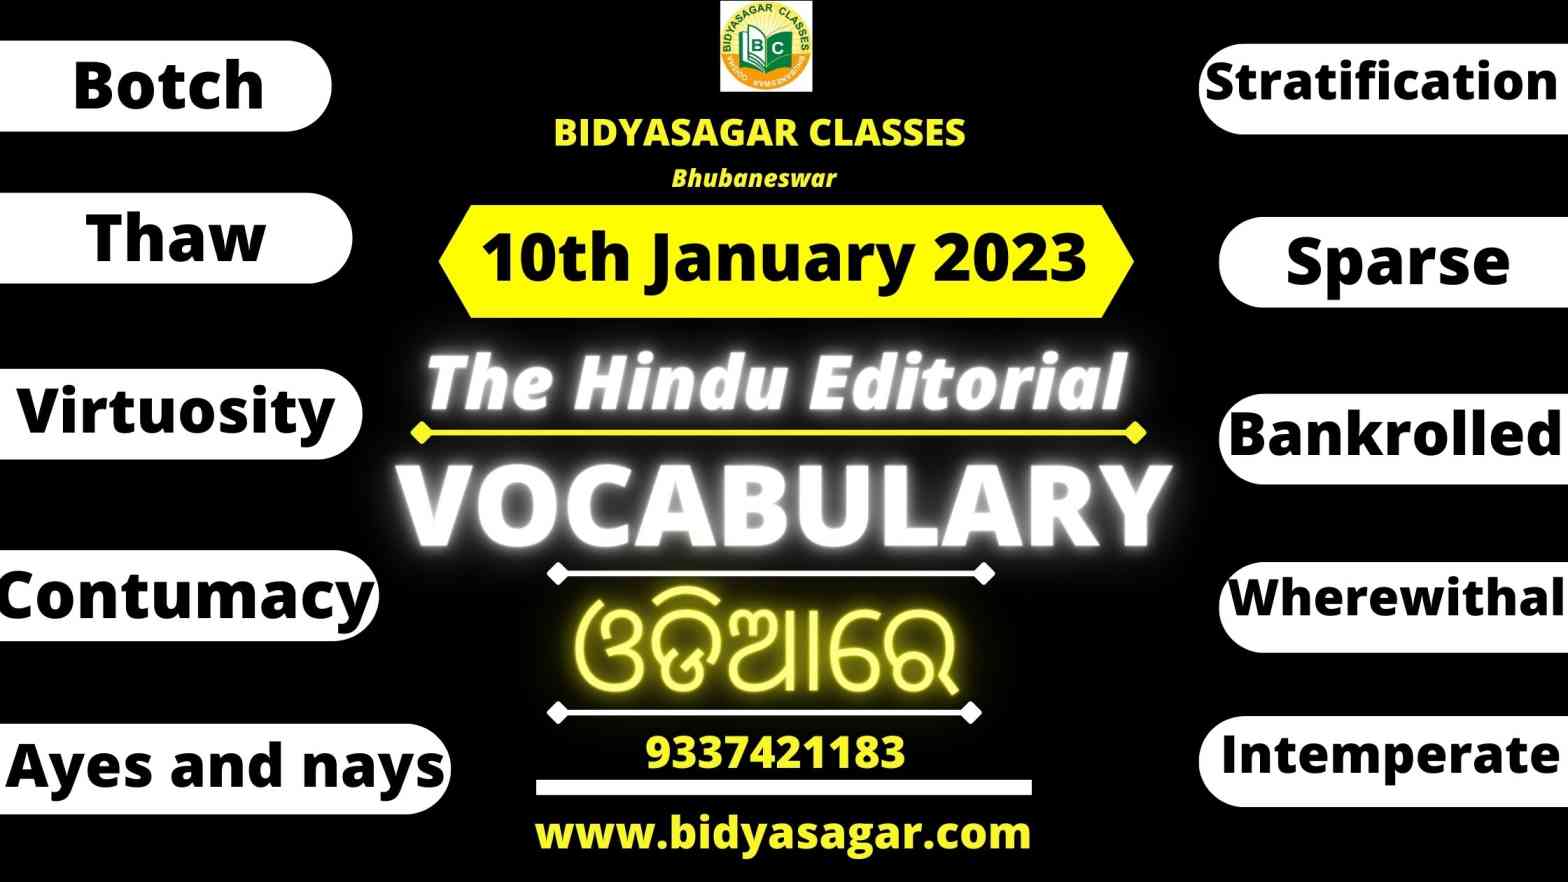 The Hindu Editorial Vocabulary of 10th January 2023